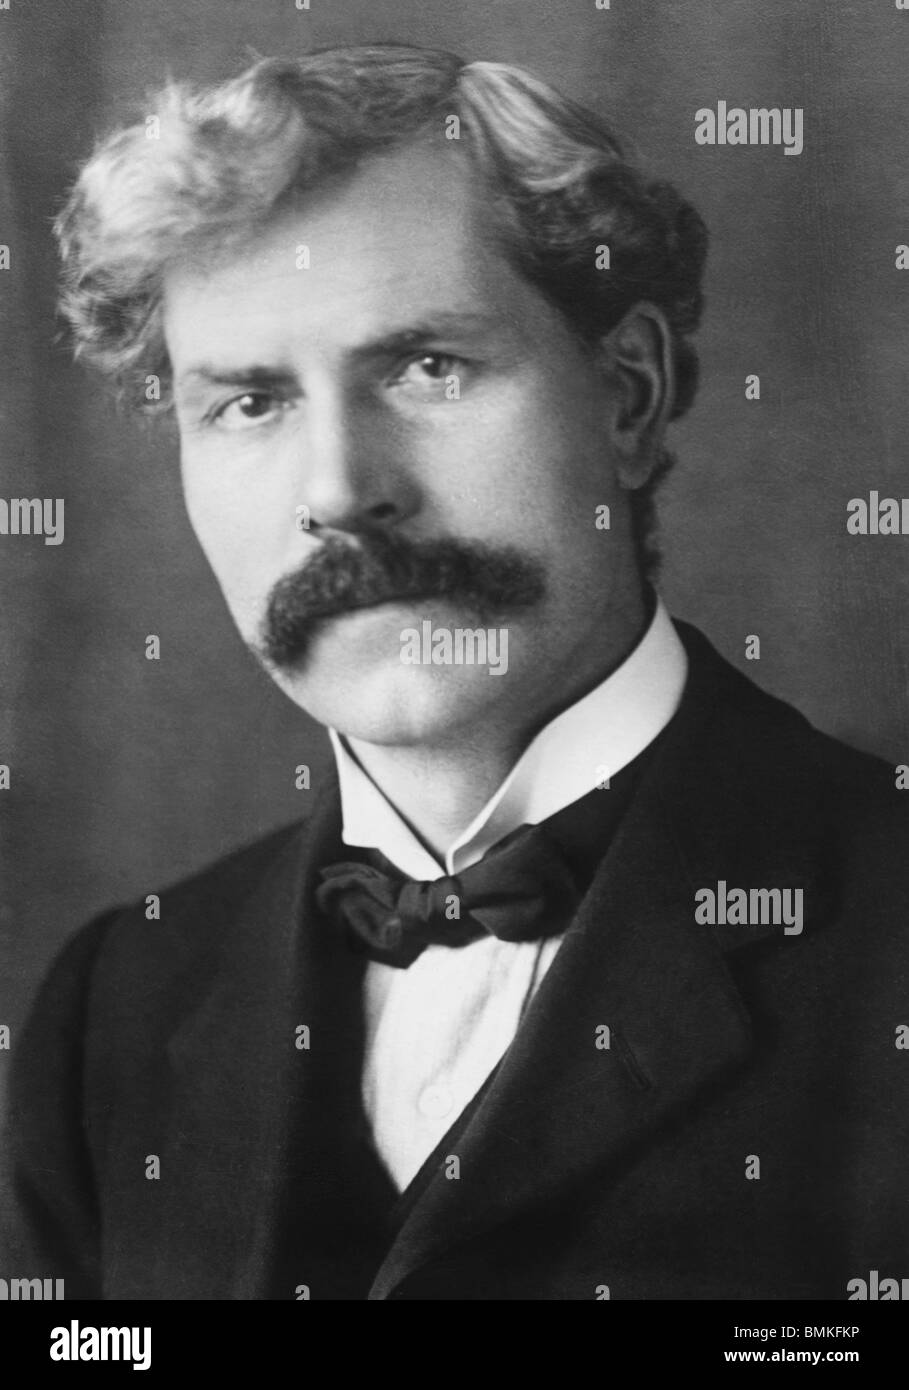 Undated photo of James Ramsay MacDonald (1866 - 1937) - Labour statesman and twice UK Prime Minister (1924 and 1929 - 35). Stock Photo